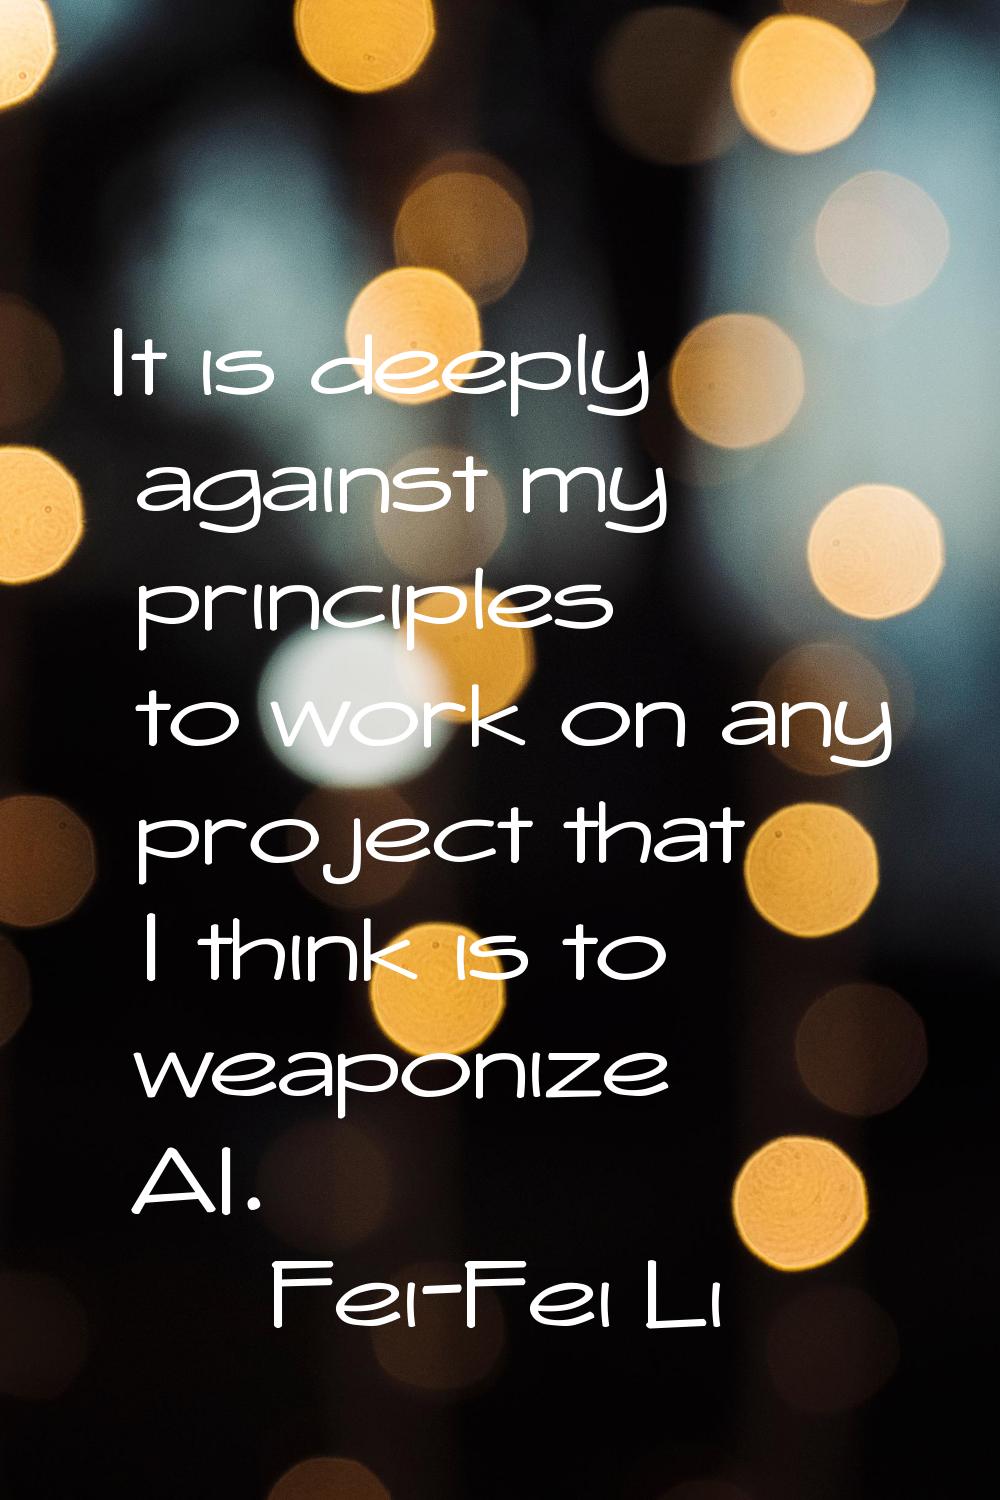 It is deeply against my principles to work on any project that I think is to weaponize AI.